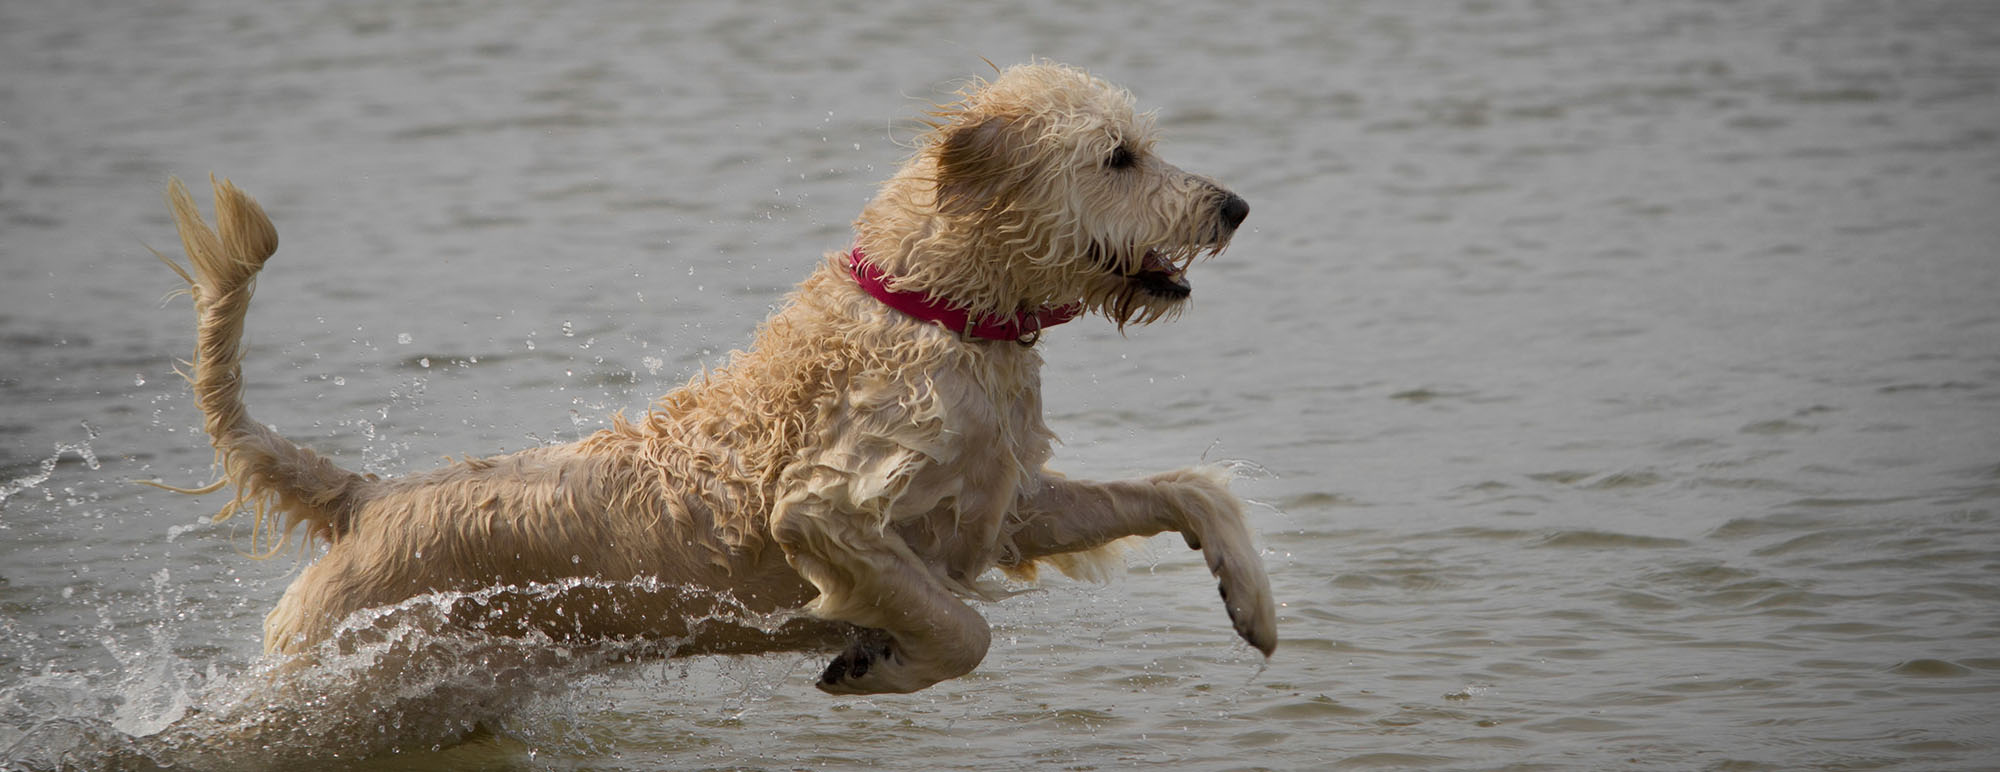 A wet, white dog leaping in the water.